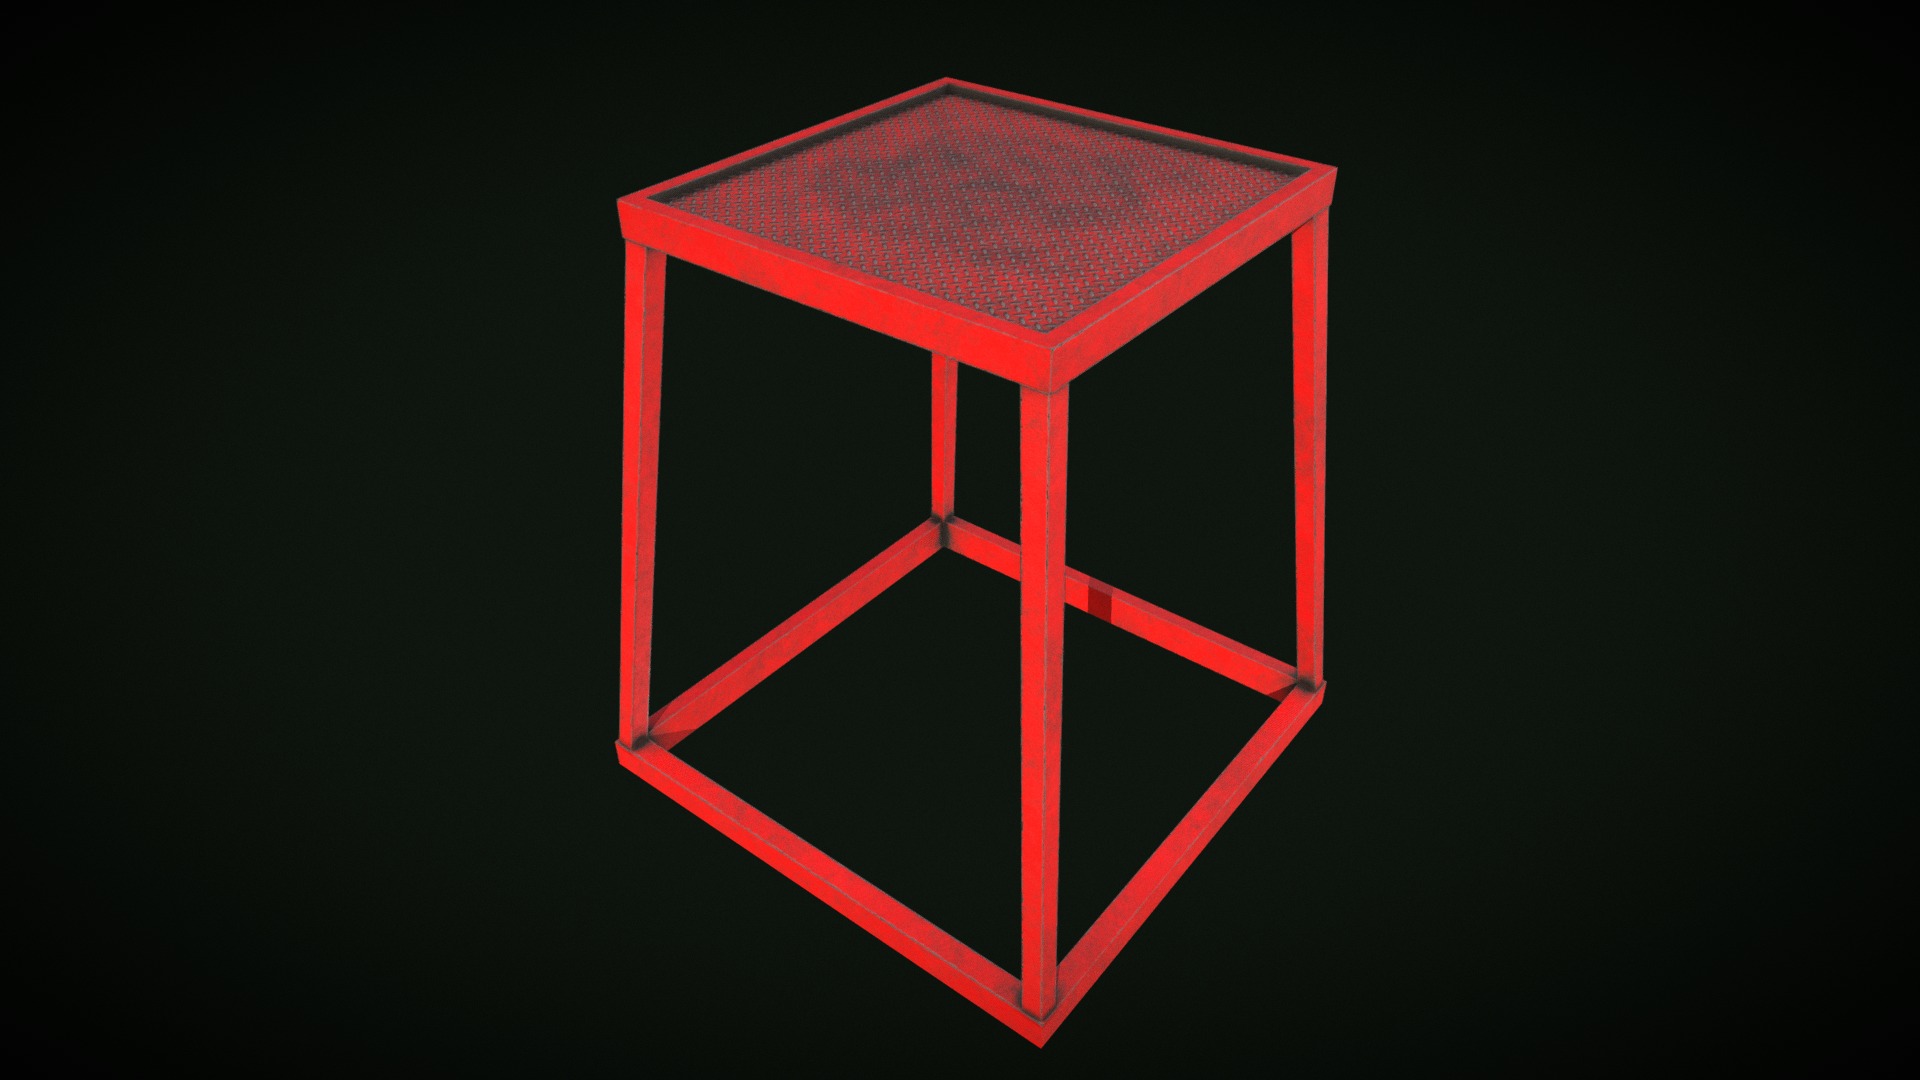 3D model Gym Plyometric Stool – Low Poly - This is a 3D model of the Gym Plyometric Stool - Low Poly. The 3D model is about a red square with a black background.